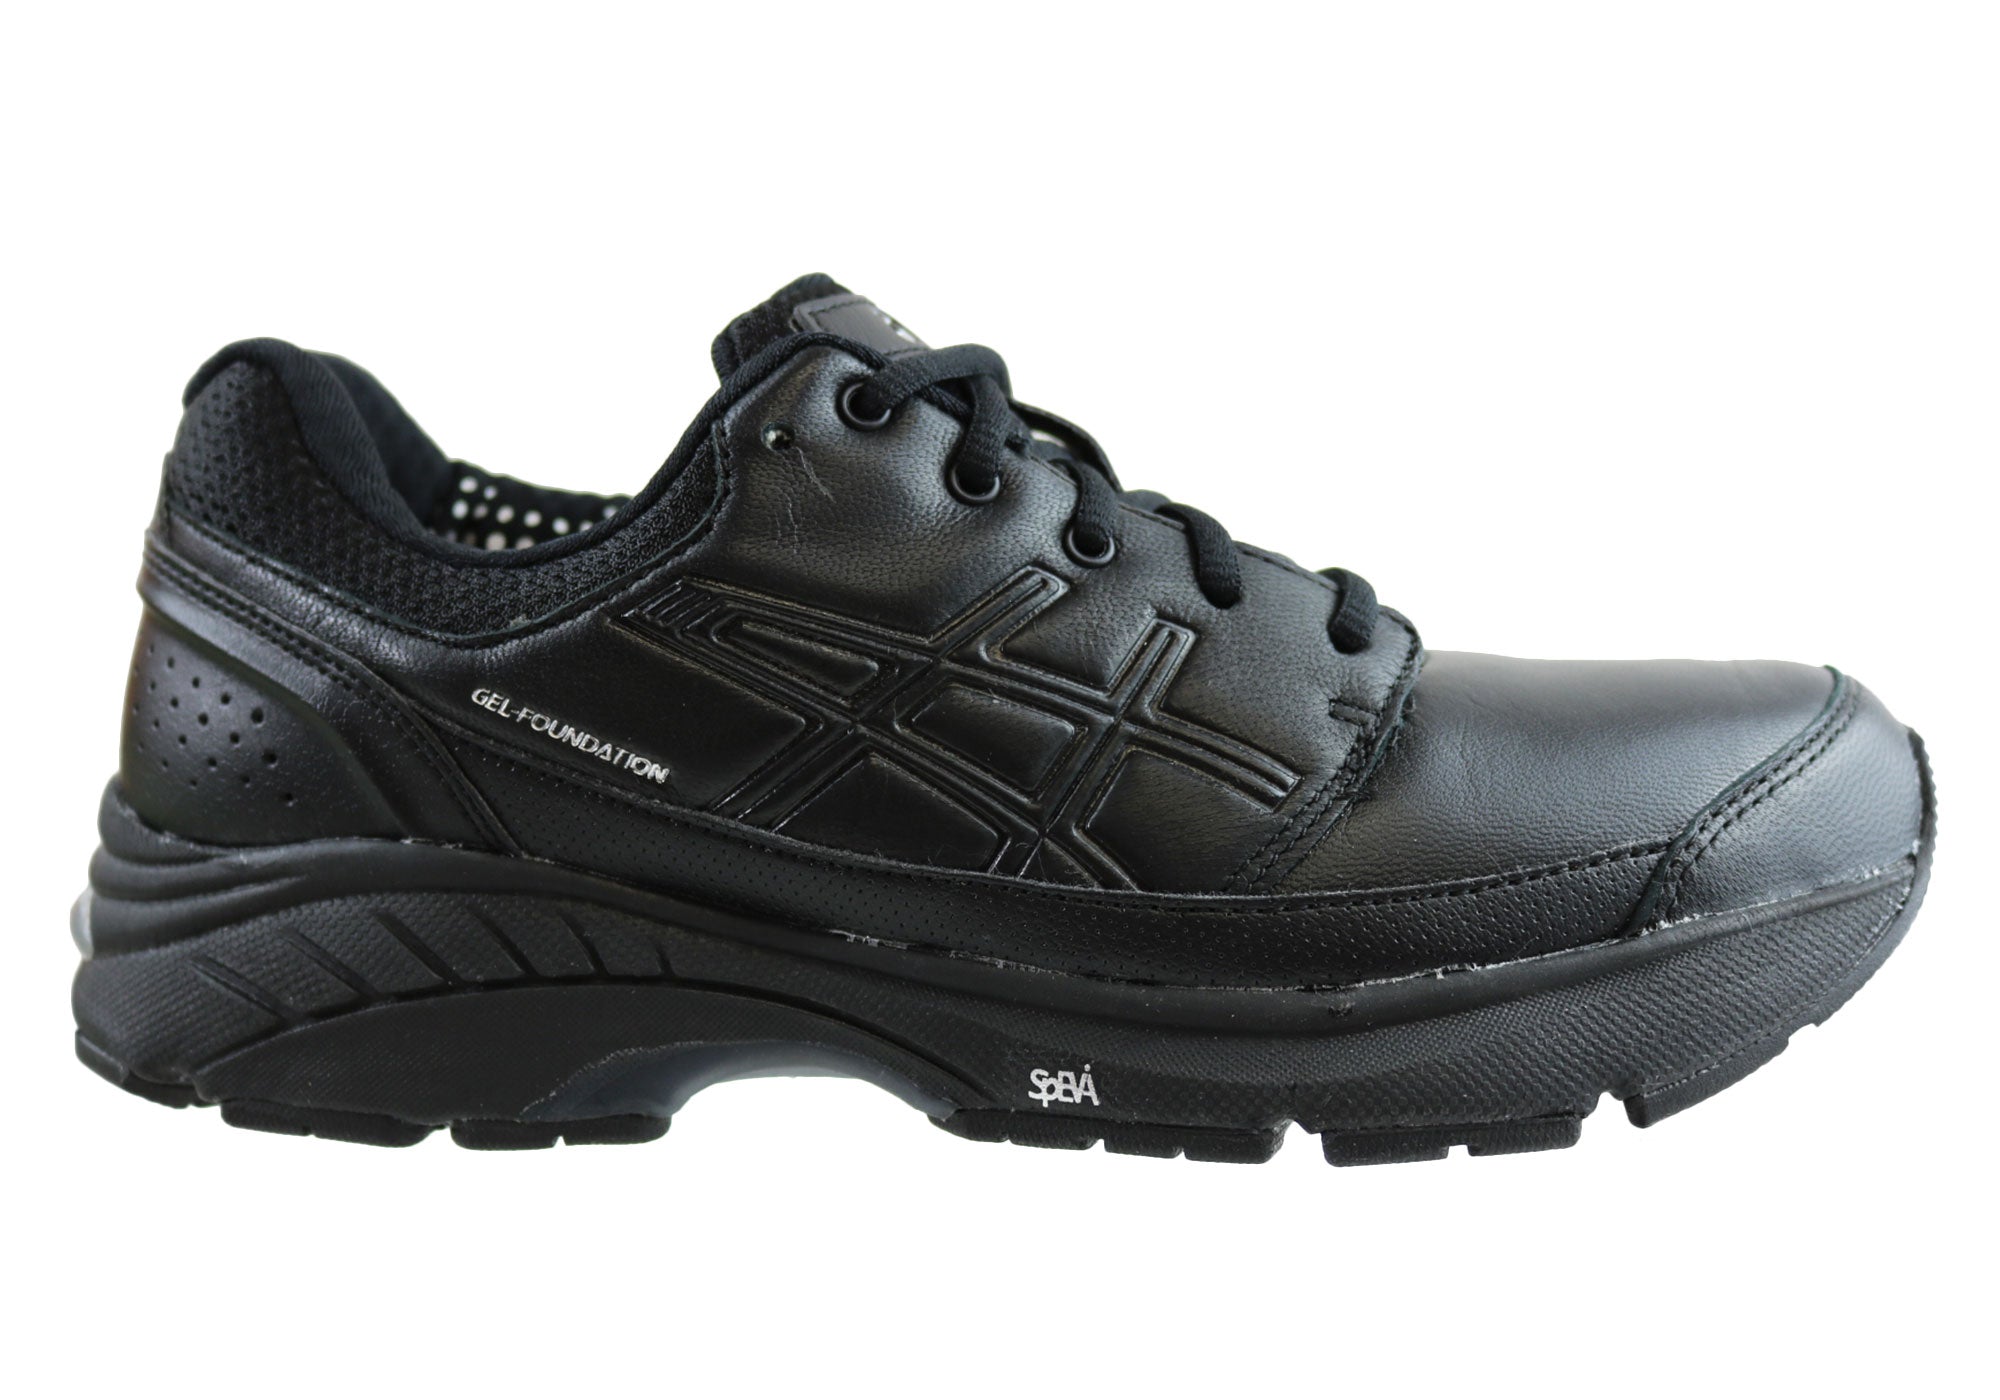 asics wide width womens shoes